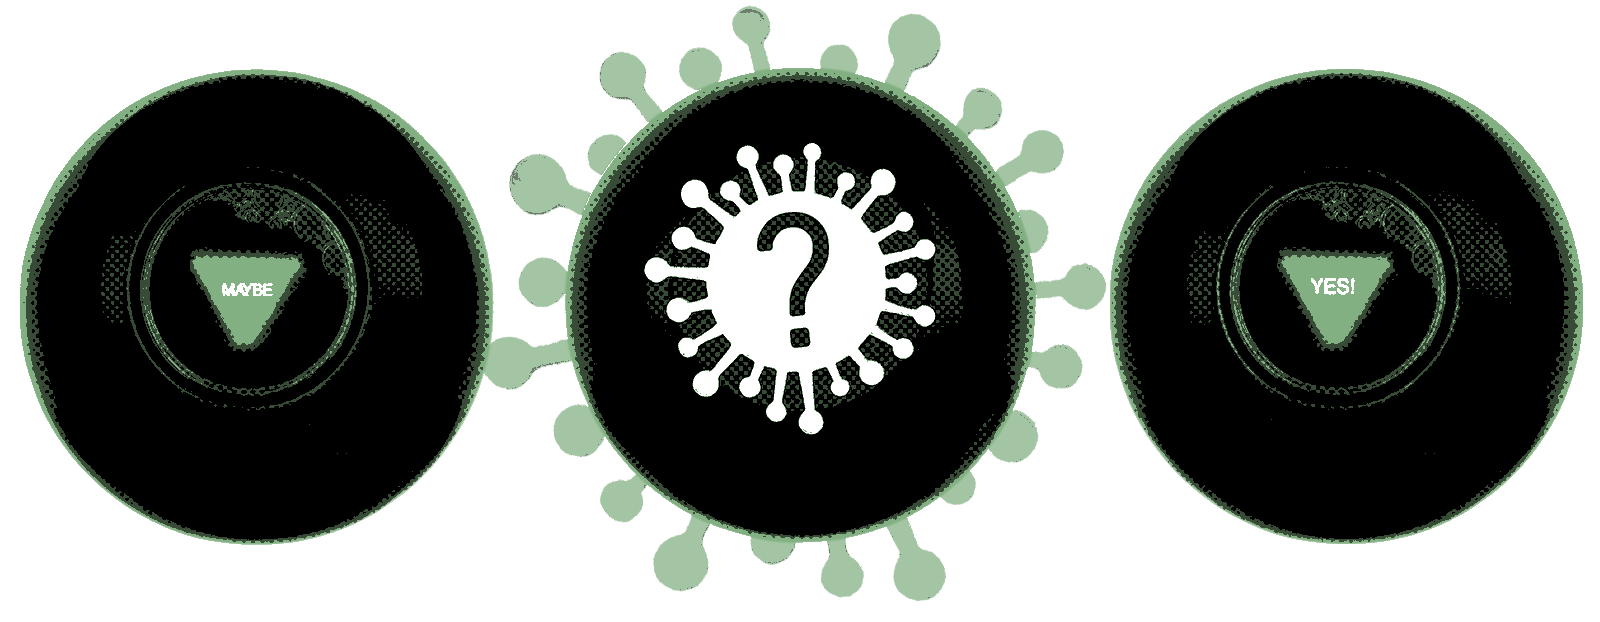 What to Ask Before Meeting Up If You're Immunocompromised or at High Risk  for COVID-19